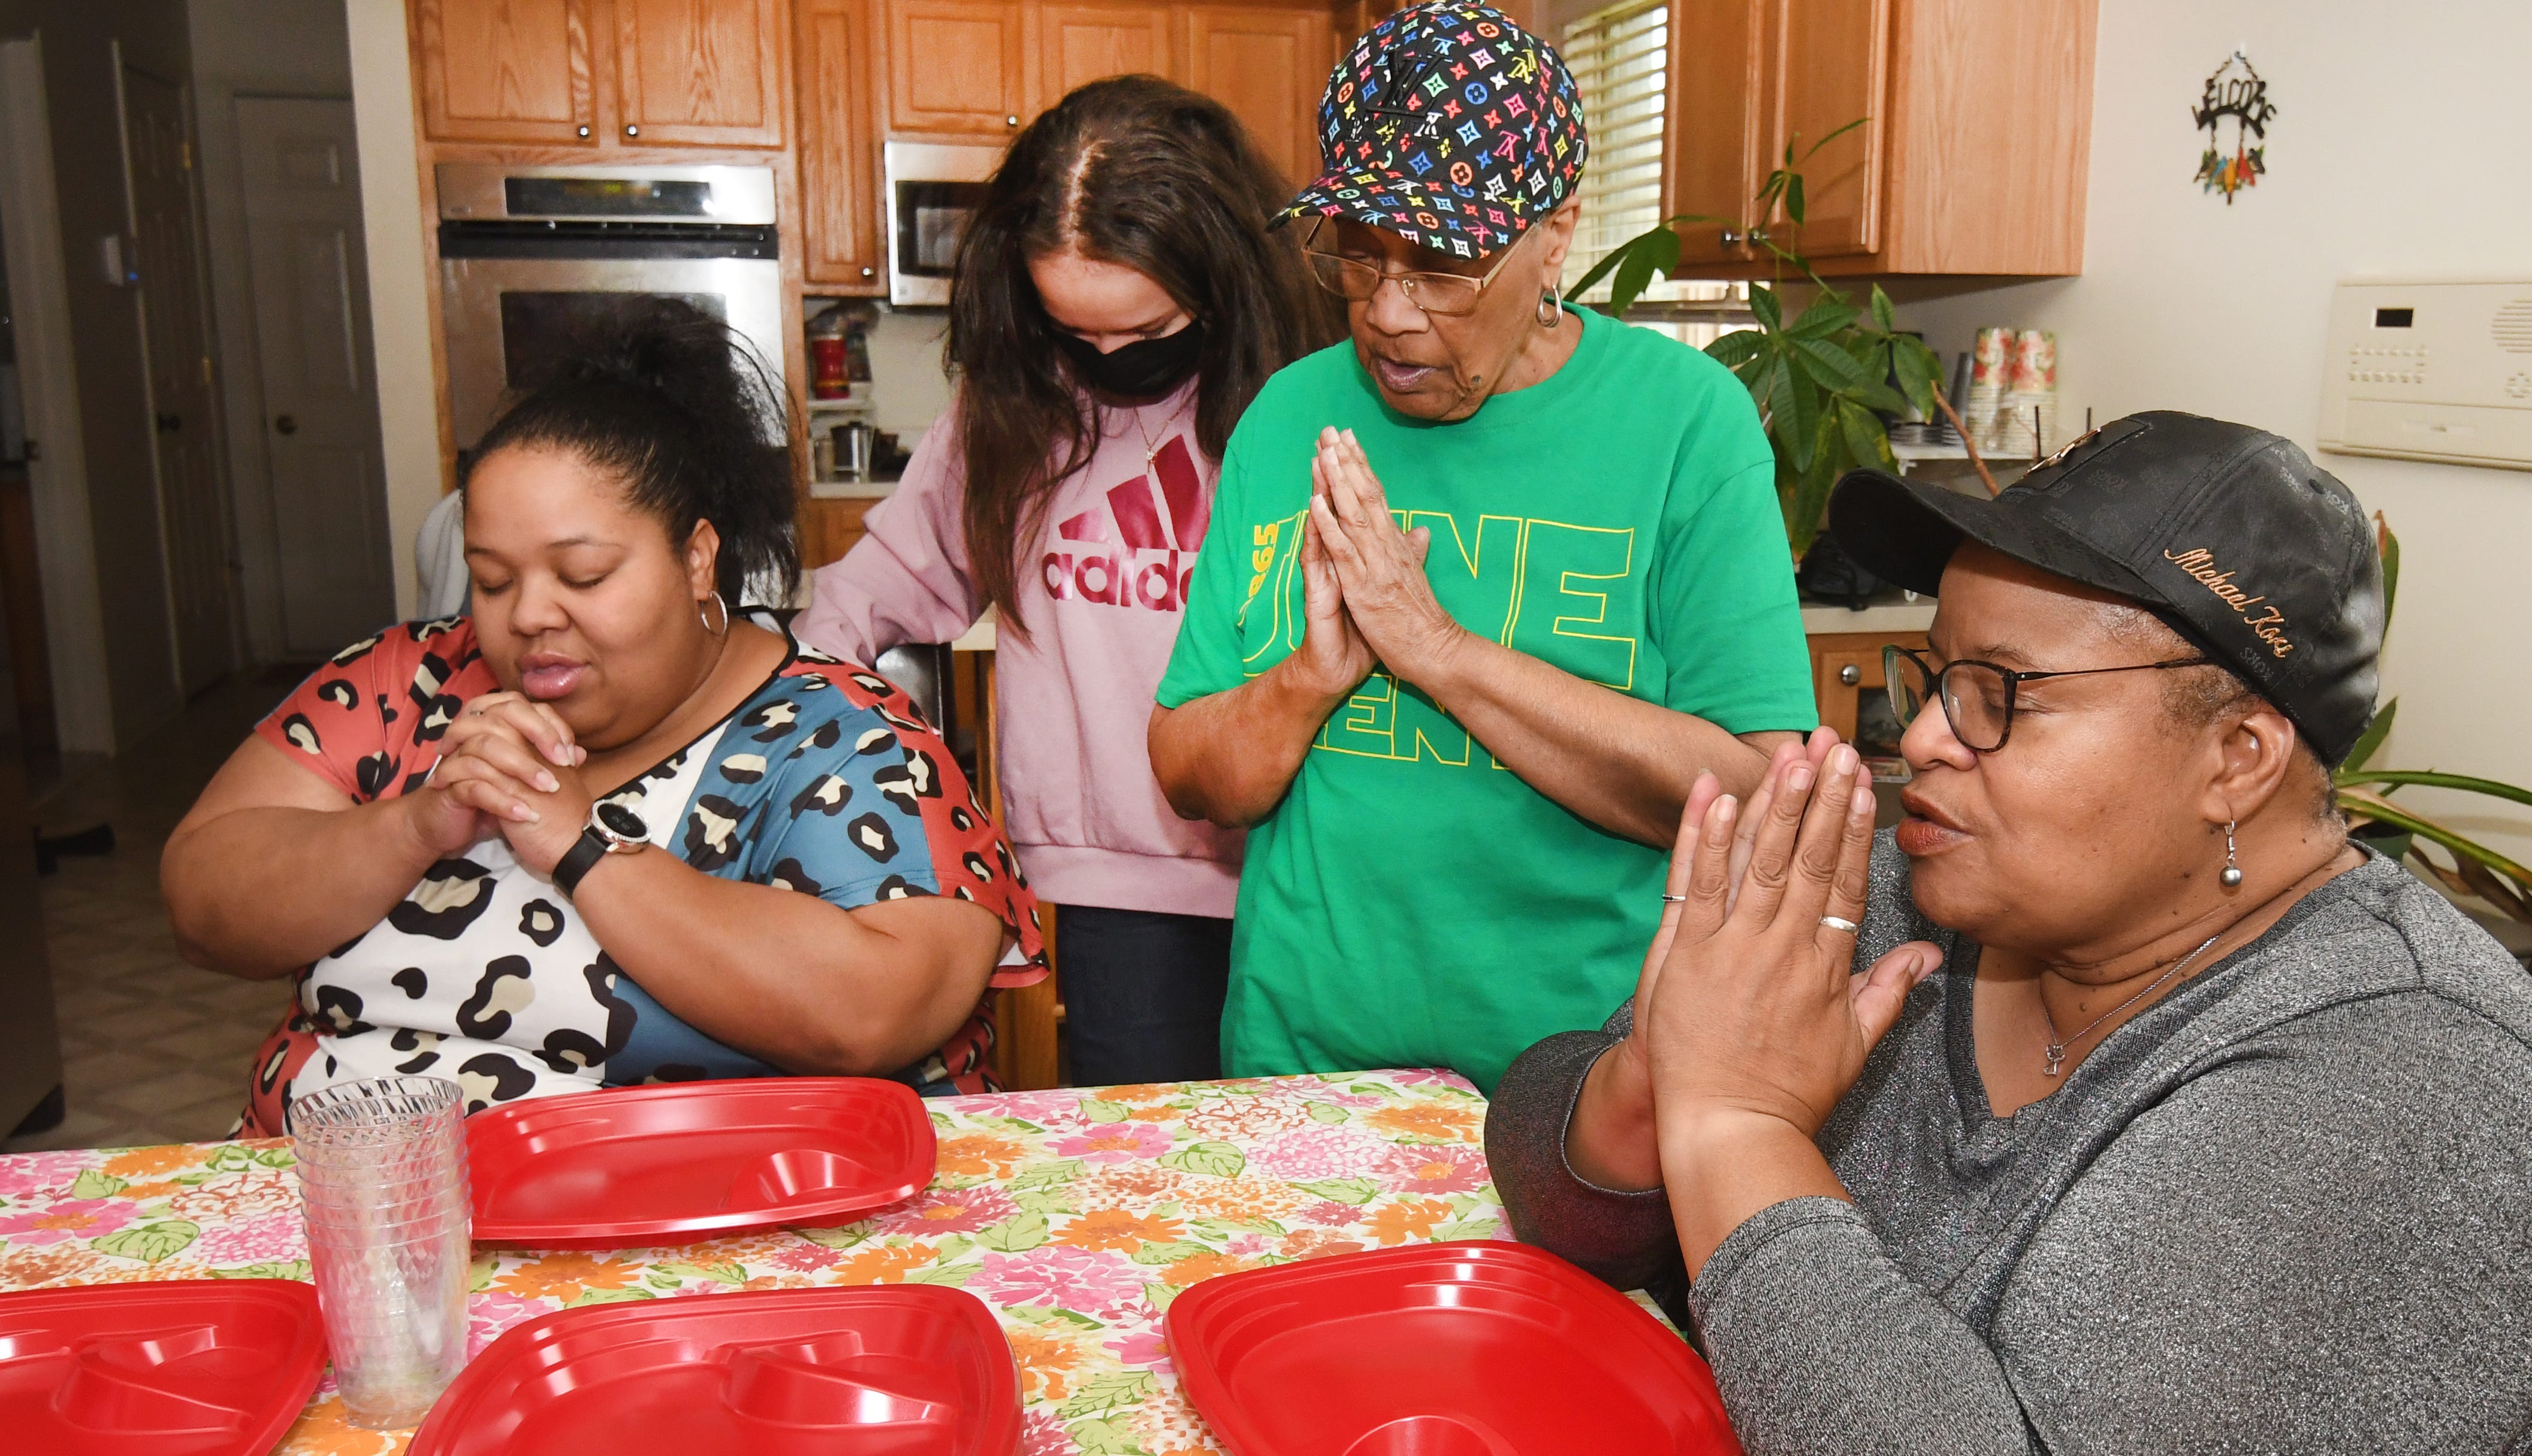 Neica Williams, from left, Selina Smith’s daughter, Chiara Smith, Selina Smith’s granddaughter, Delois McMillan, Selina Smith’s mother and Selina Smith as they pray before eating dinner at their Pontiac home. Selina Smith is a sandwiched generational caregiver.